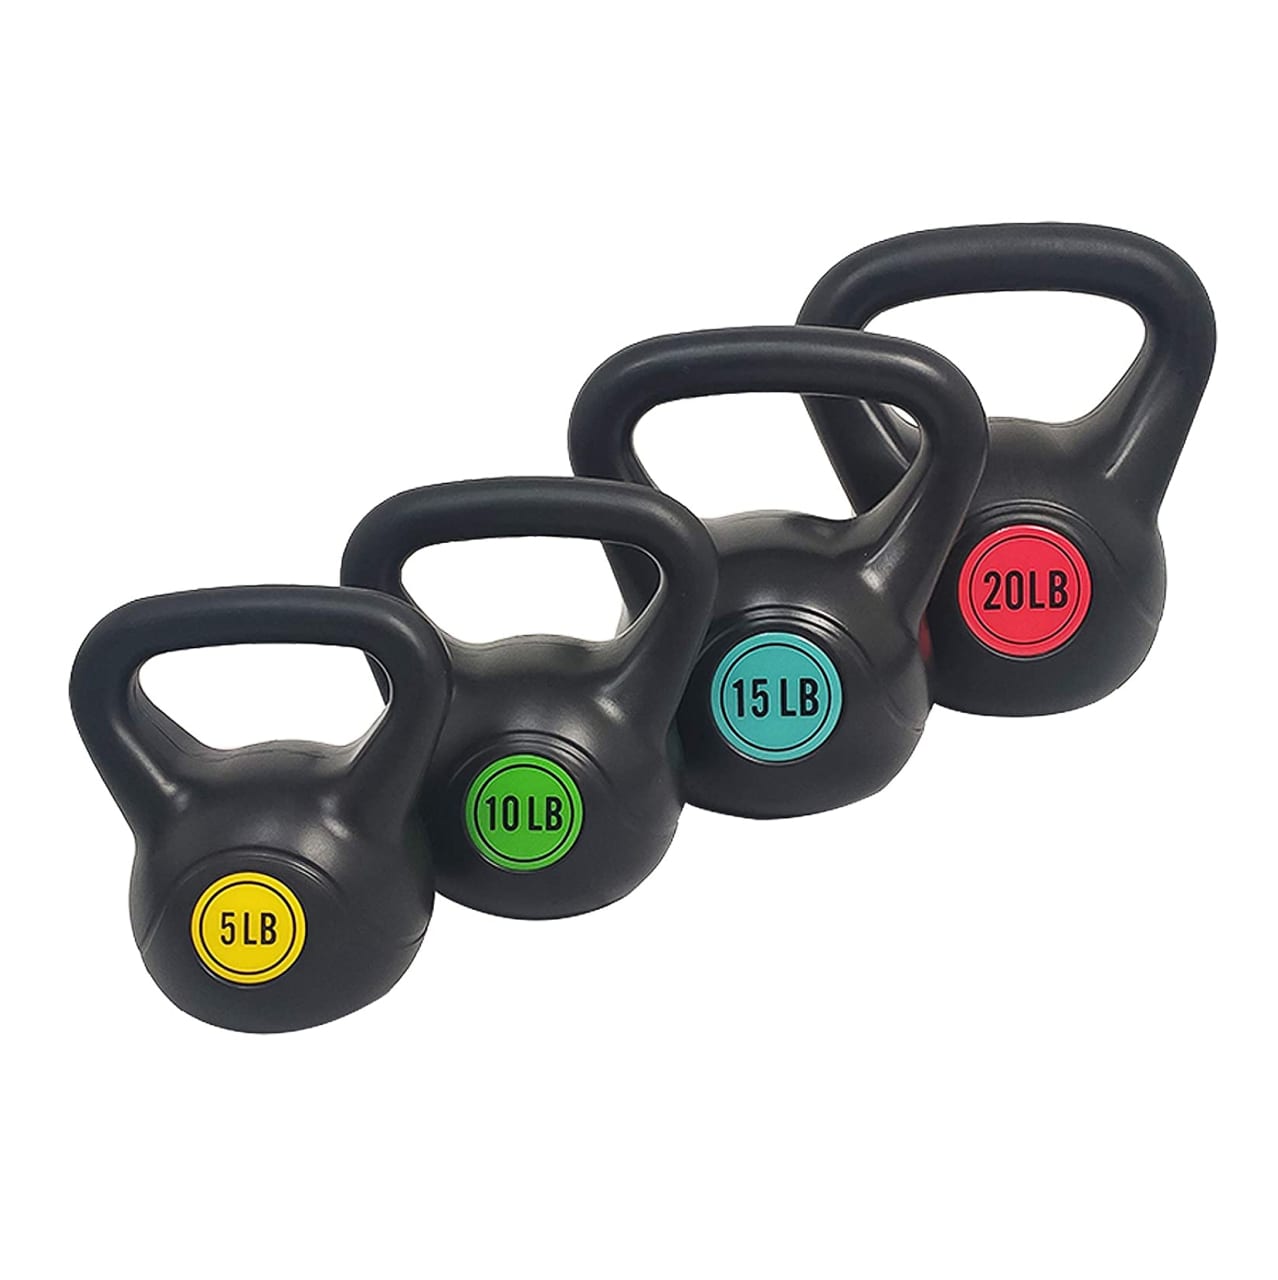 Wide Grip Kettlebell Exercise Fitness Weight Set